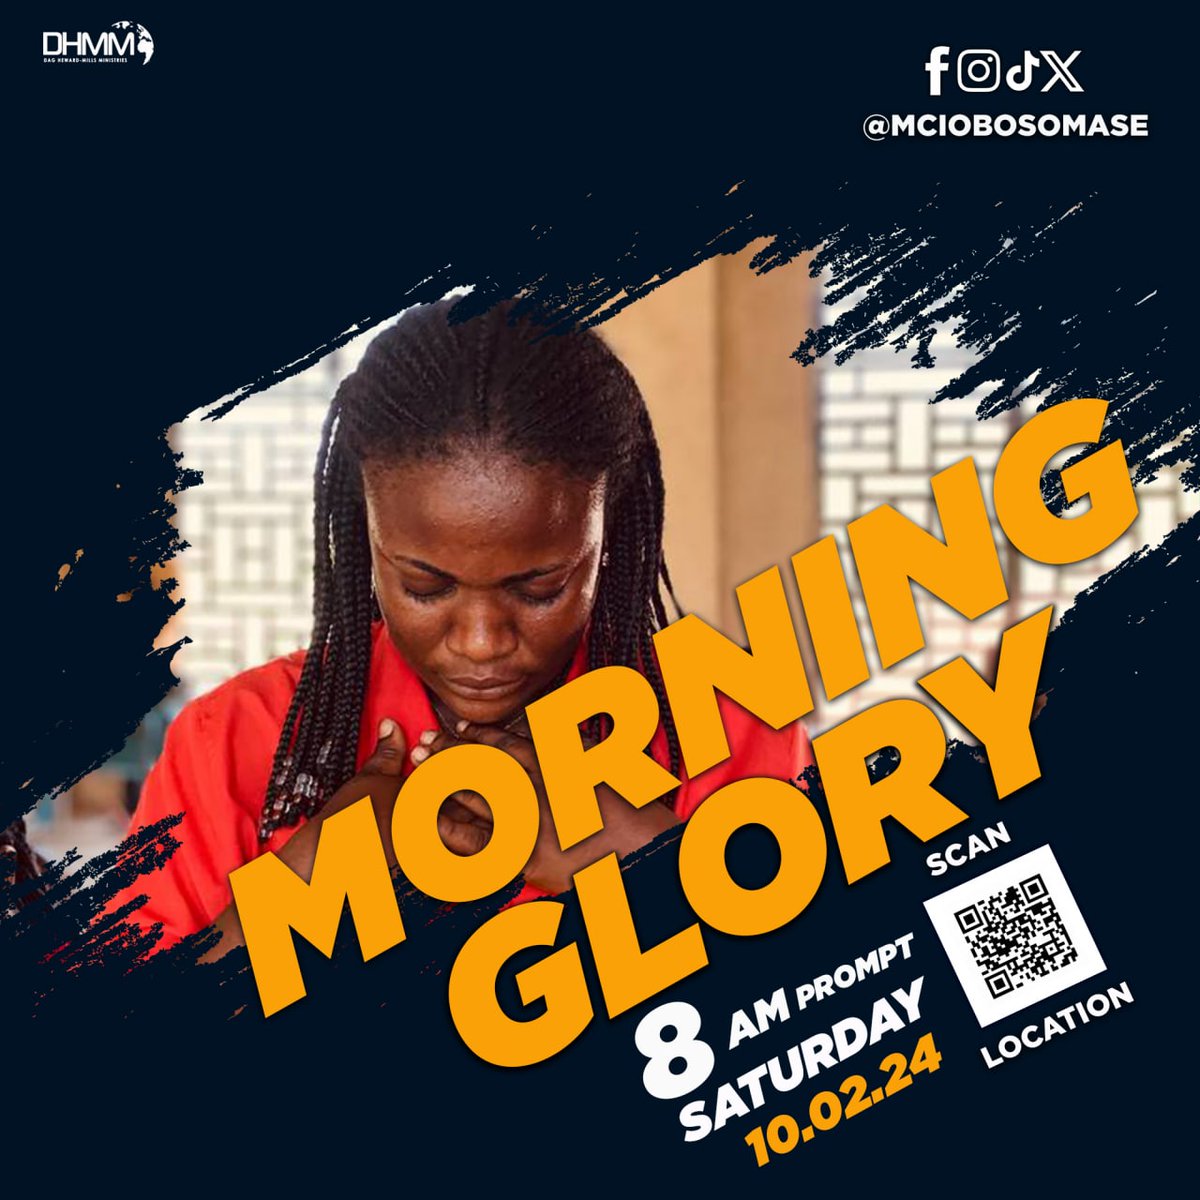 The Lord is ready to move in your life as you call upon Him. Don't miss this opportunity to be blessed. Your testimony is right around the corner. 

#MorningGlory #Kabod 
#MCI_OBOSOMASE